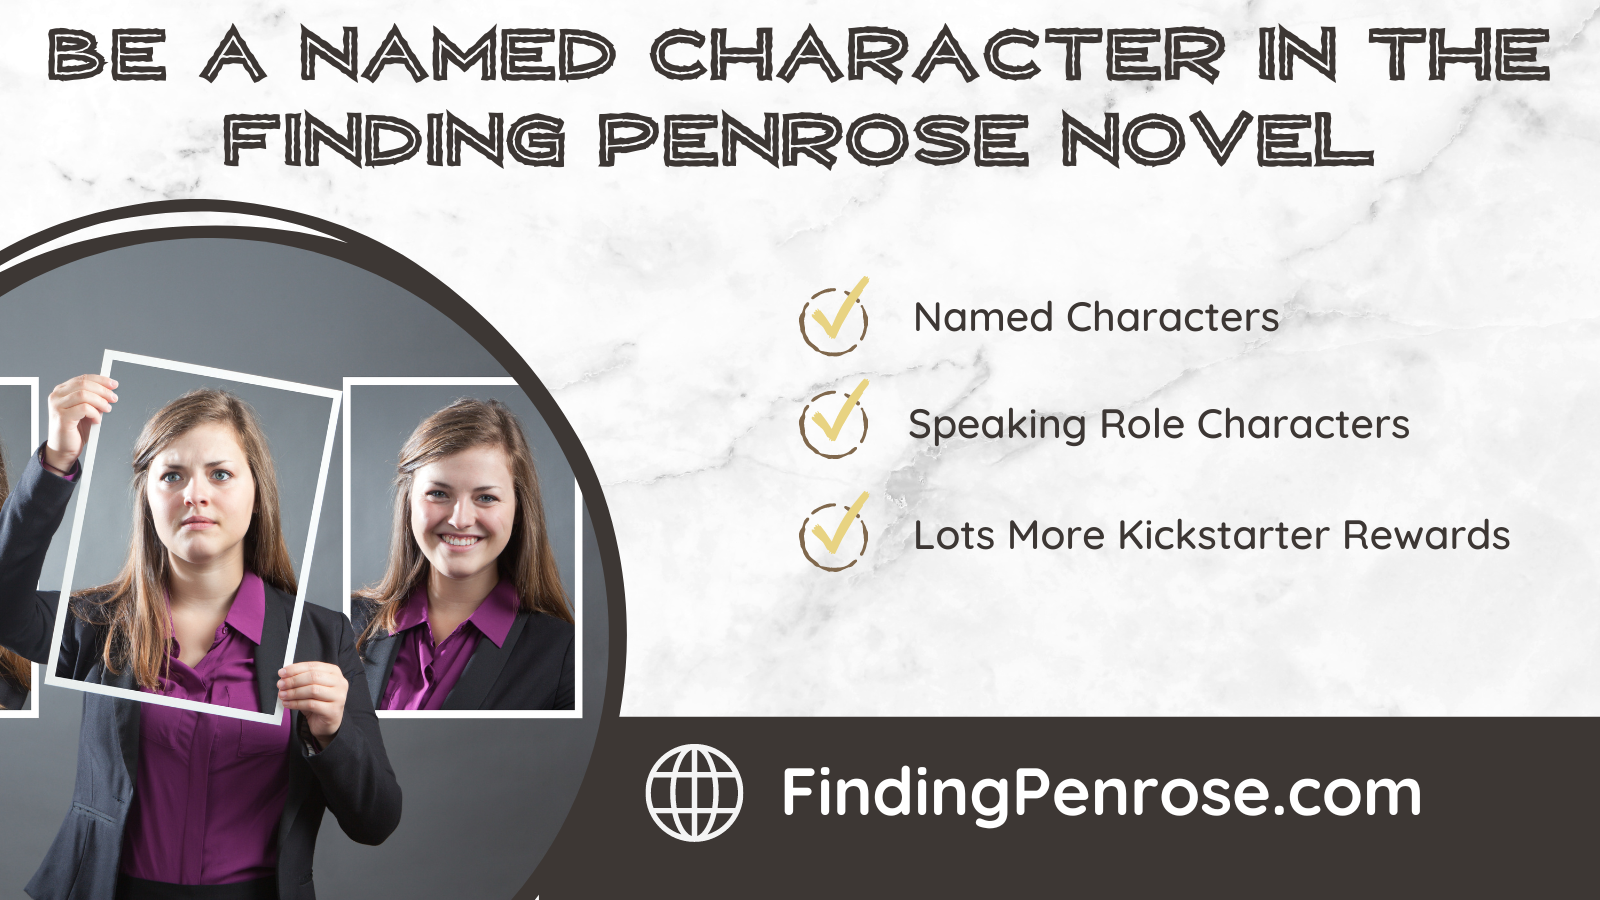 Be A Named Character in Finding Penrose Novel (Twitter Post)